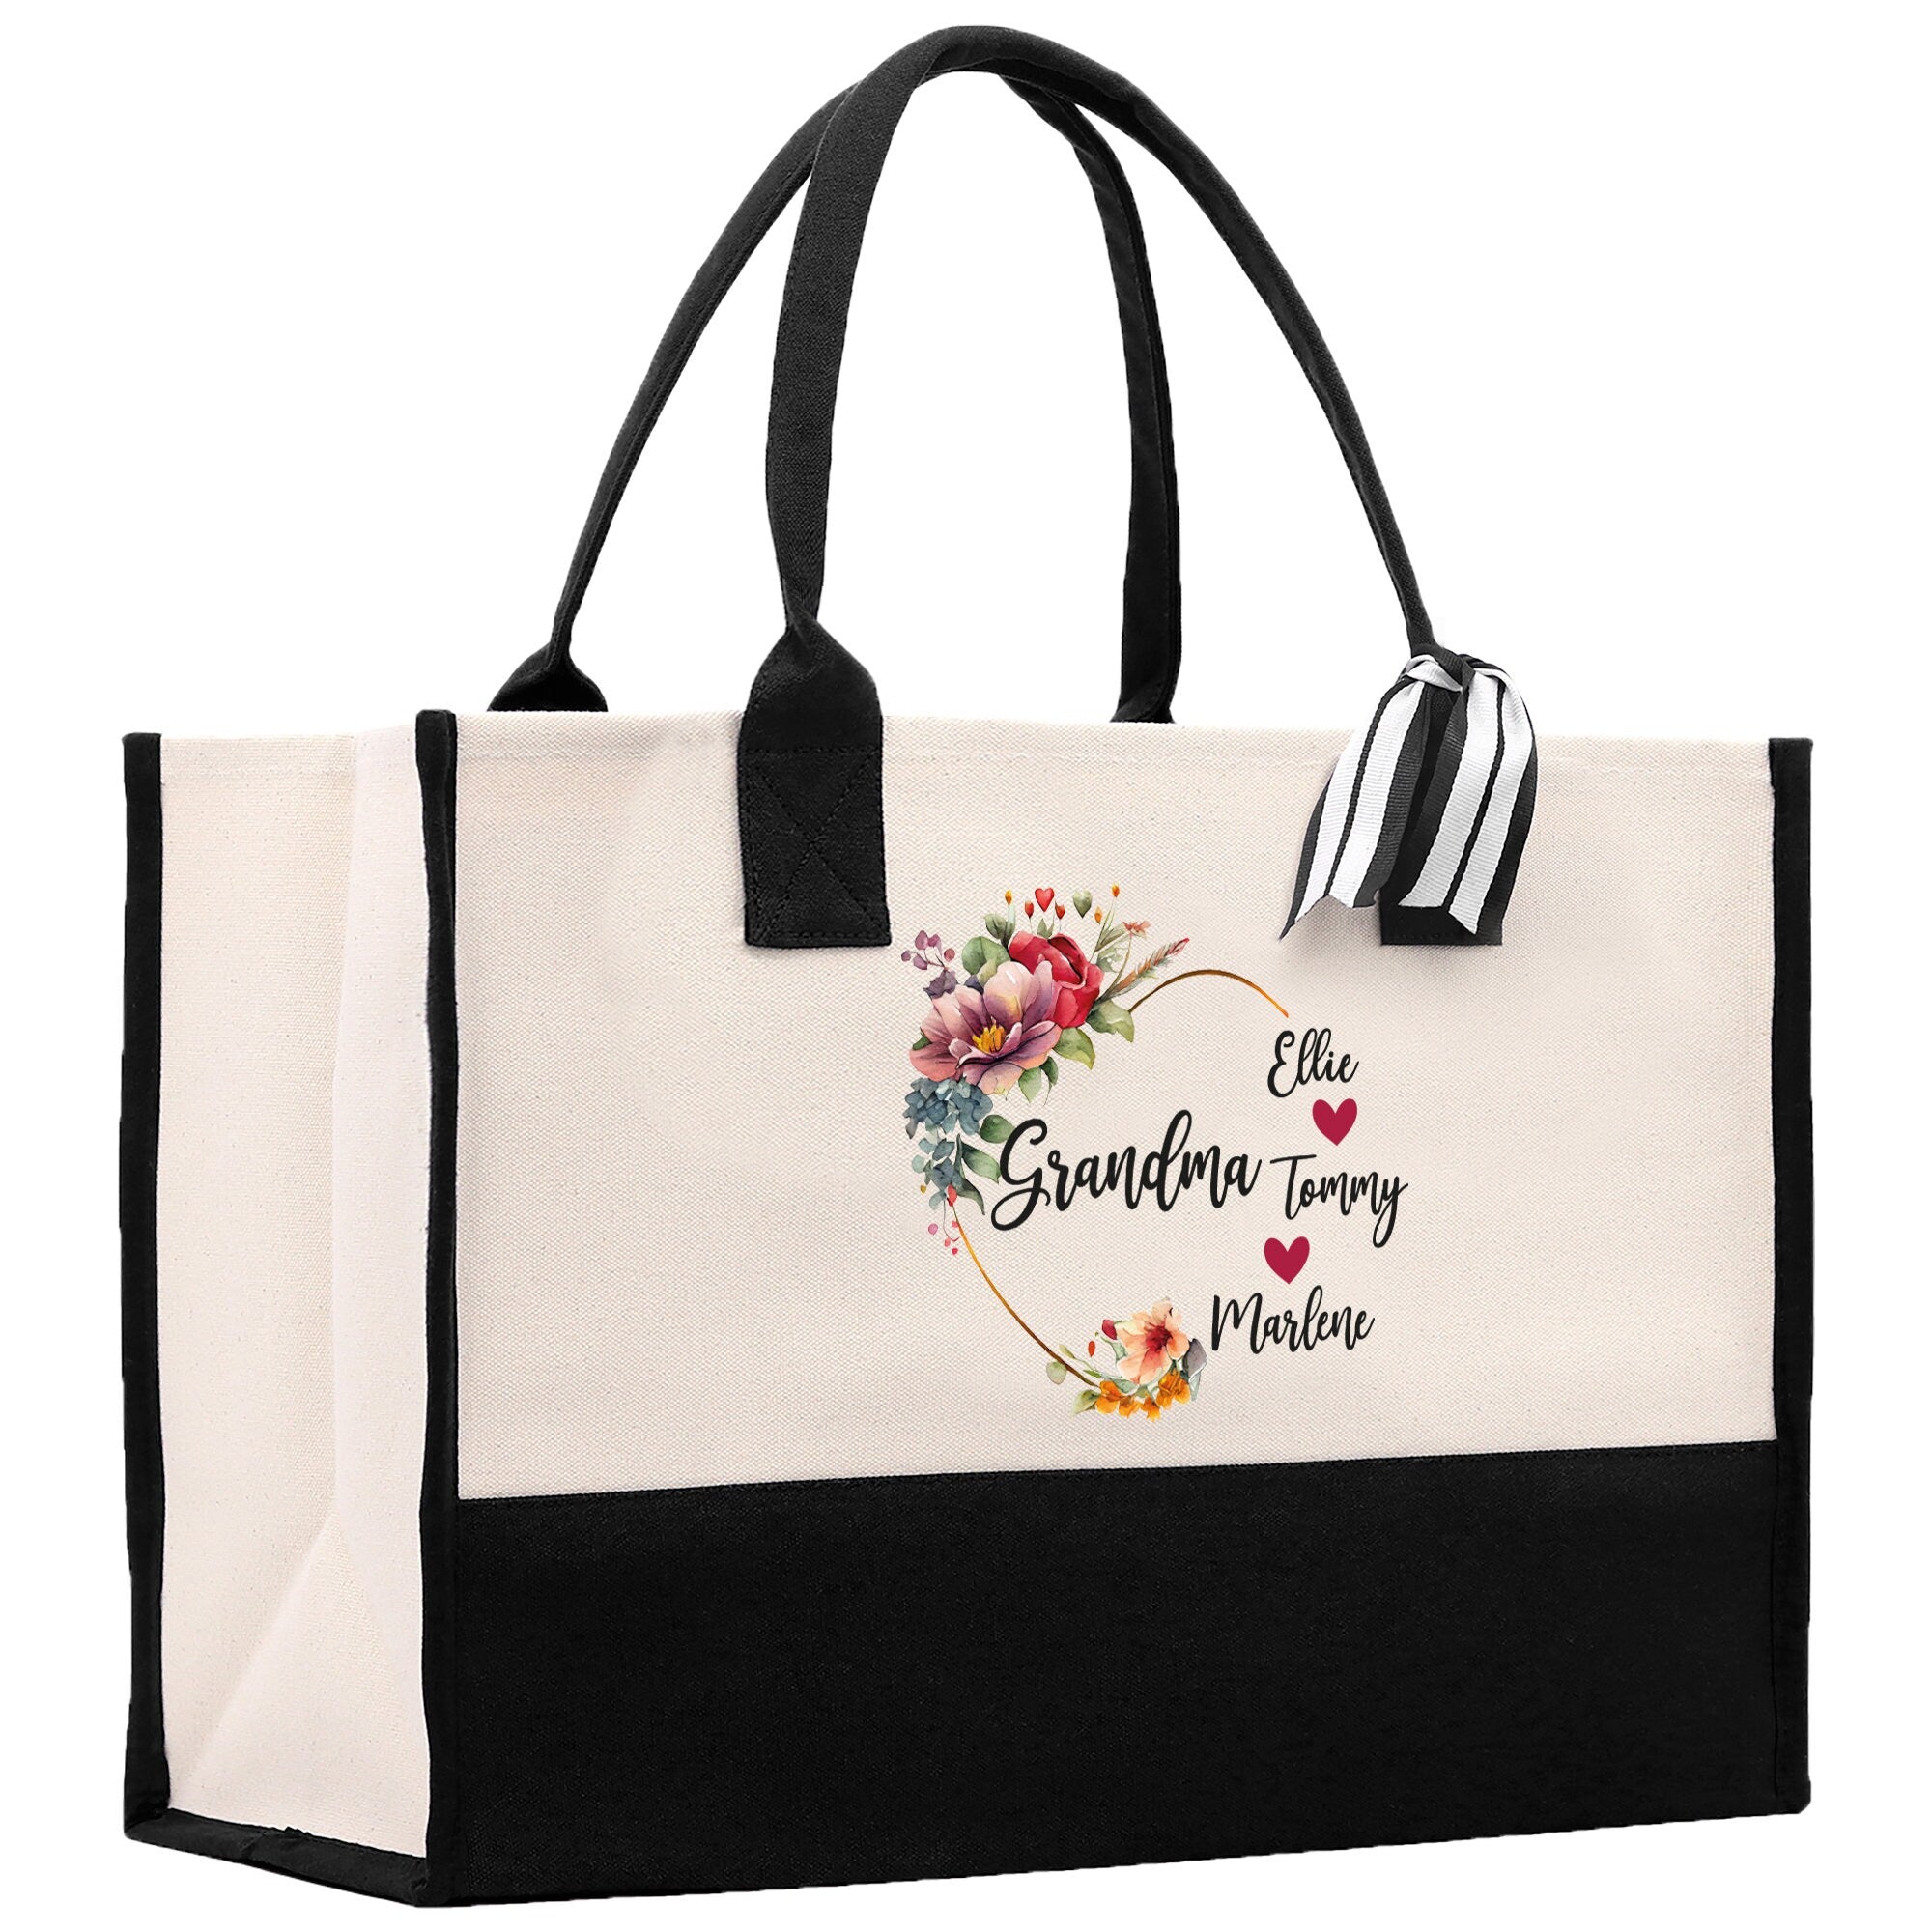 a black and white bag with a floral design